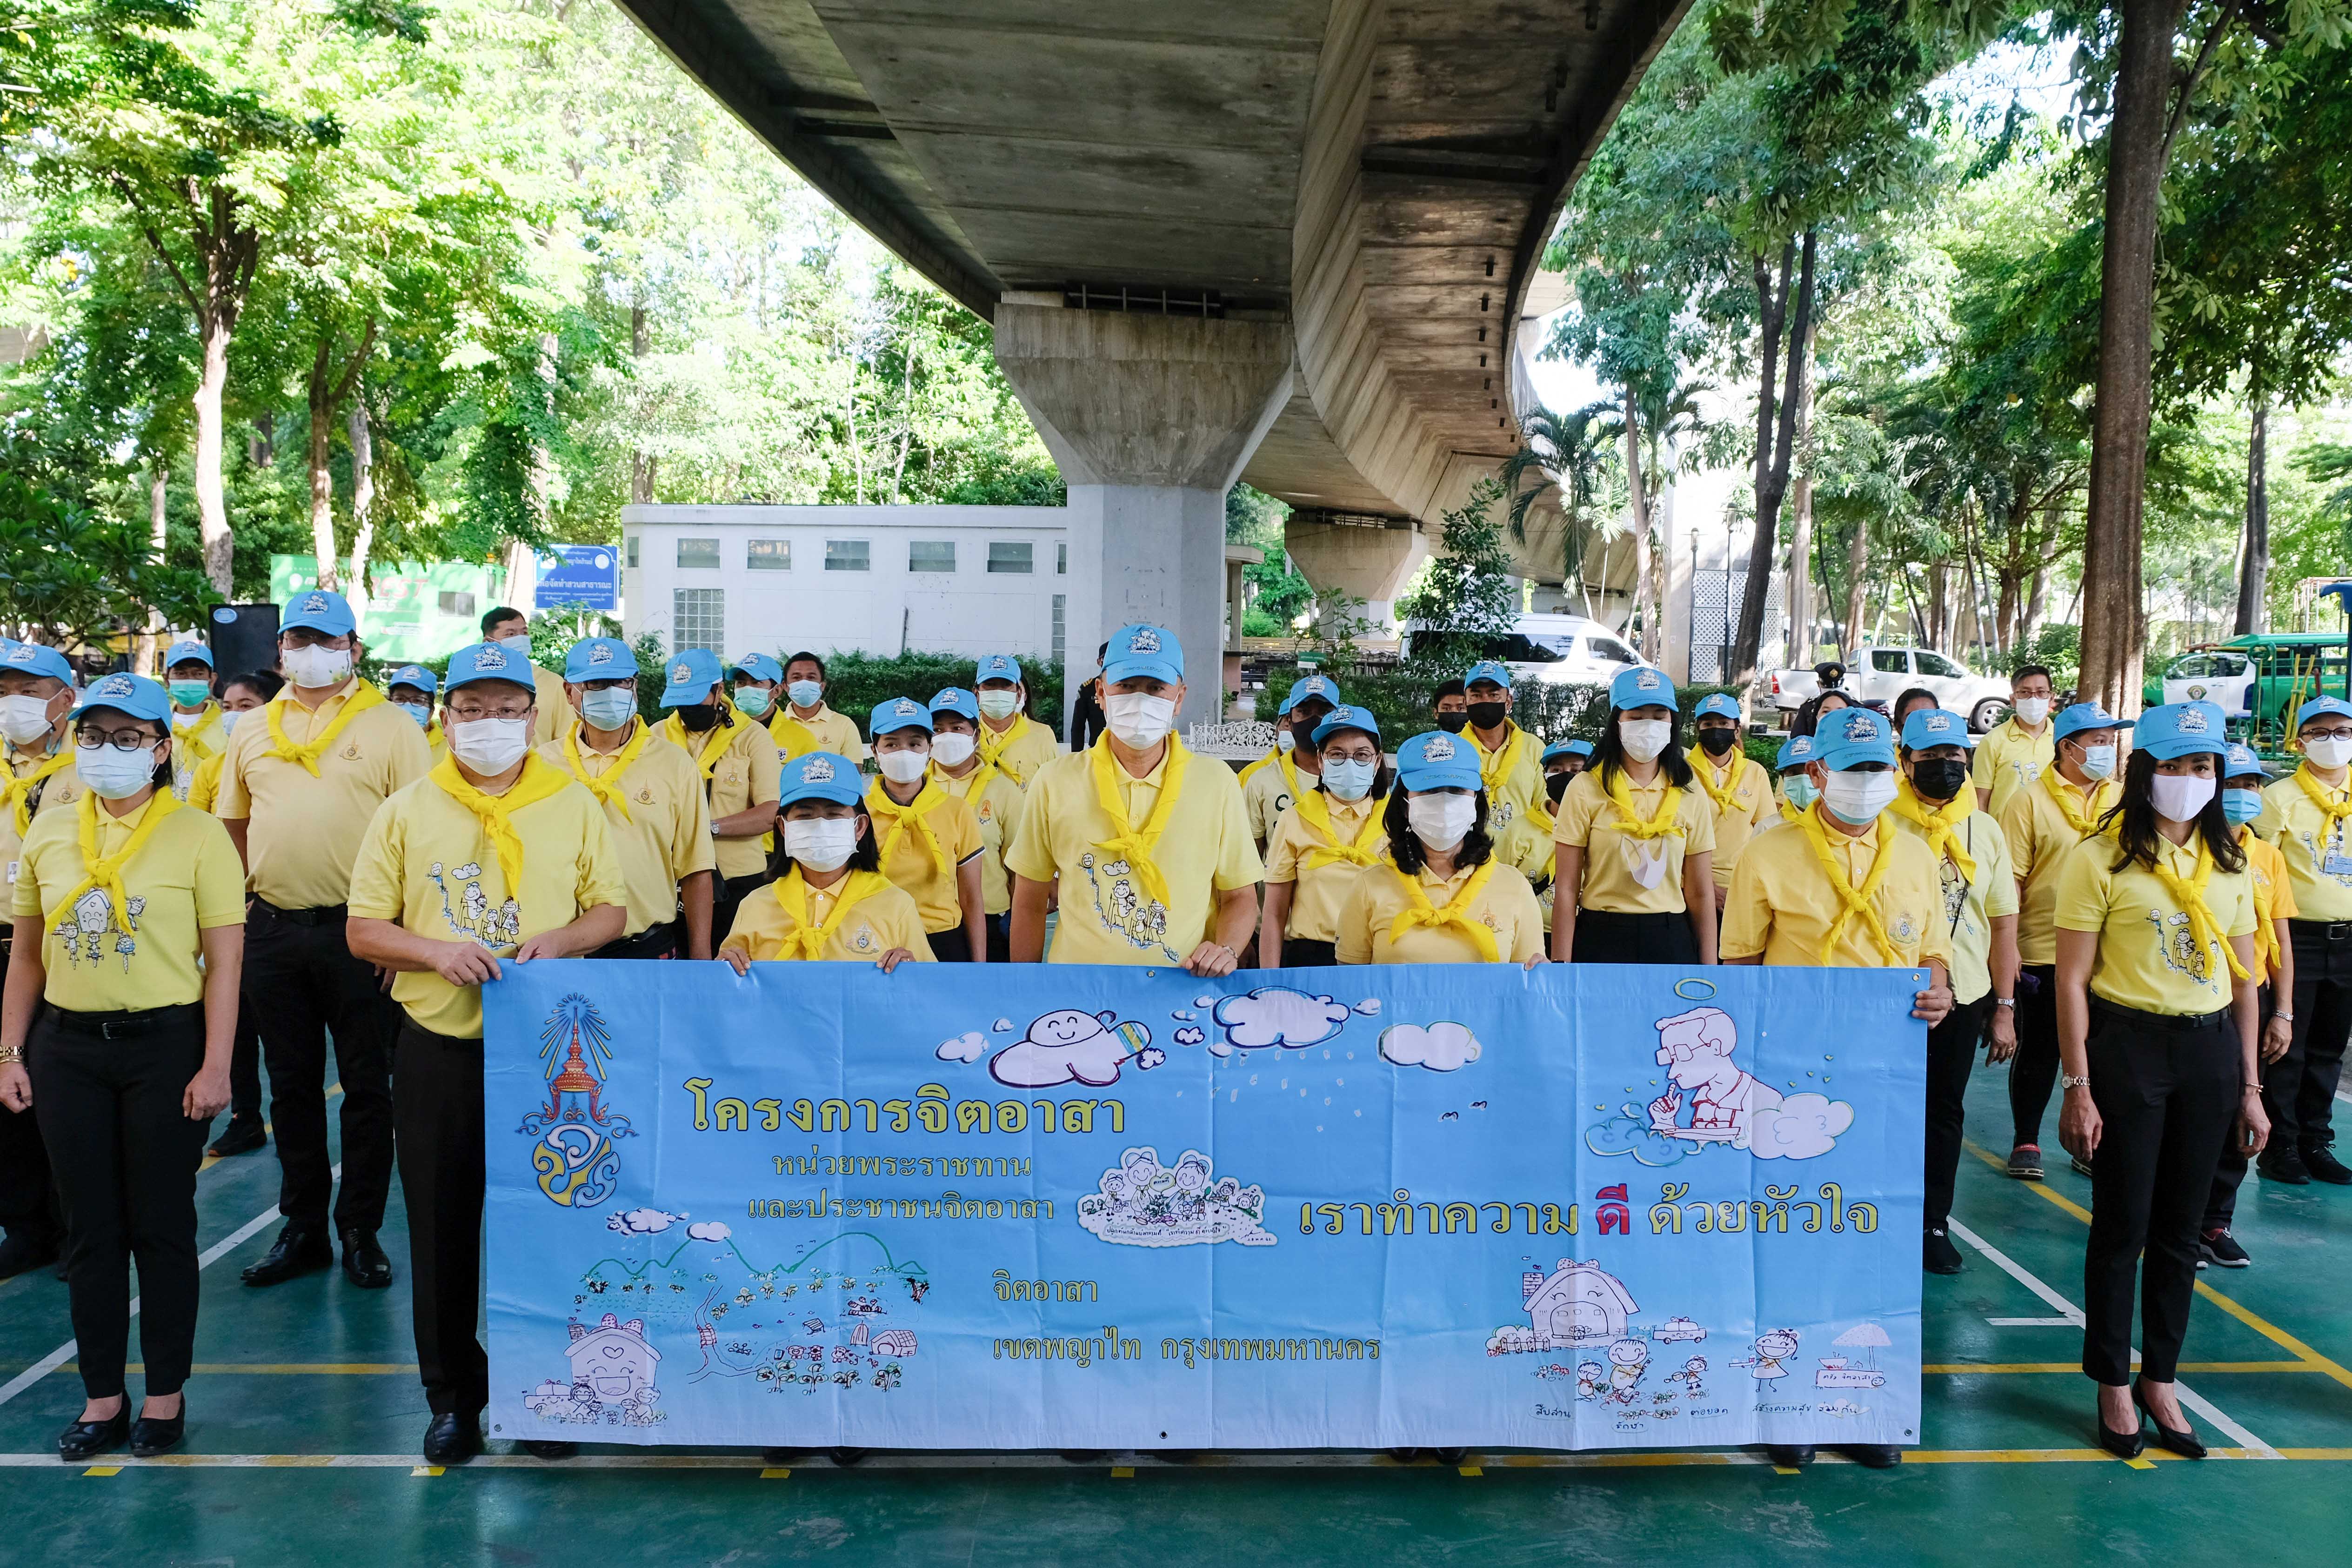 EXIM Thailand and Phayathai District Office Participate in Volunteering Activity on the Occasion of the Birthday Anniversary of Her Majesty the Queen